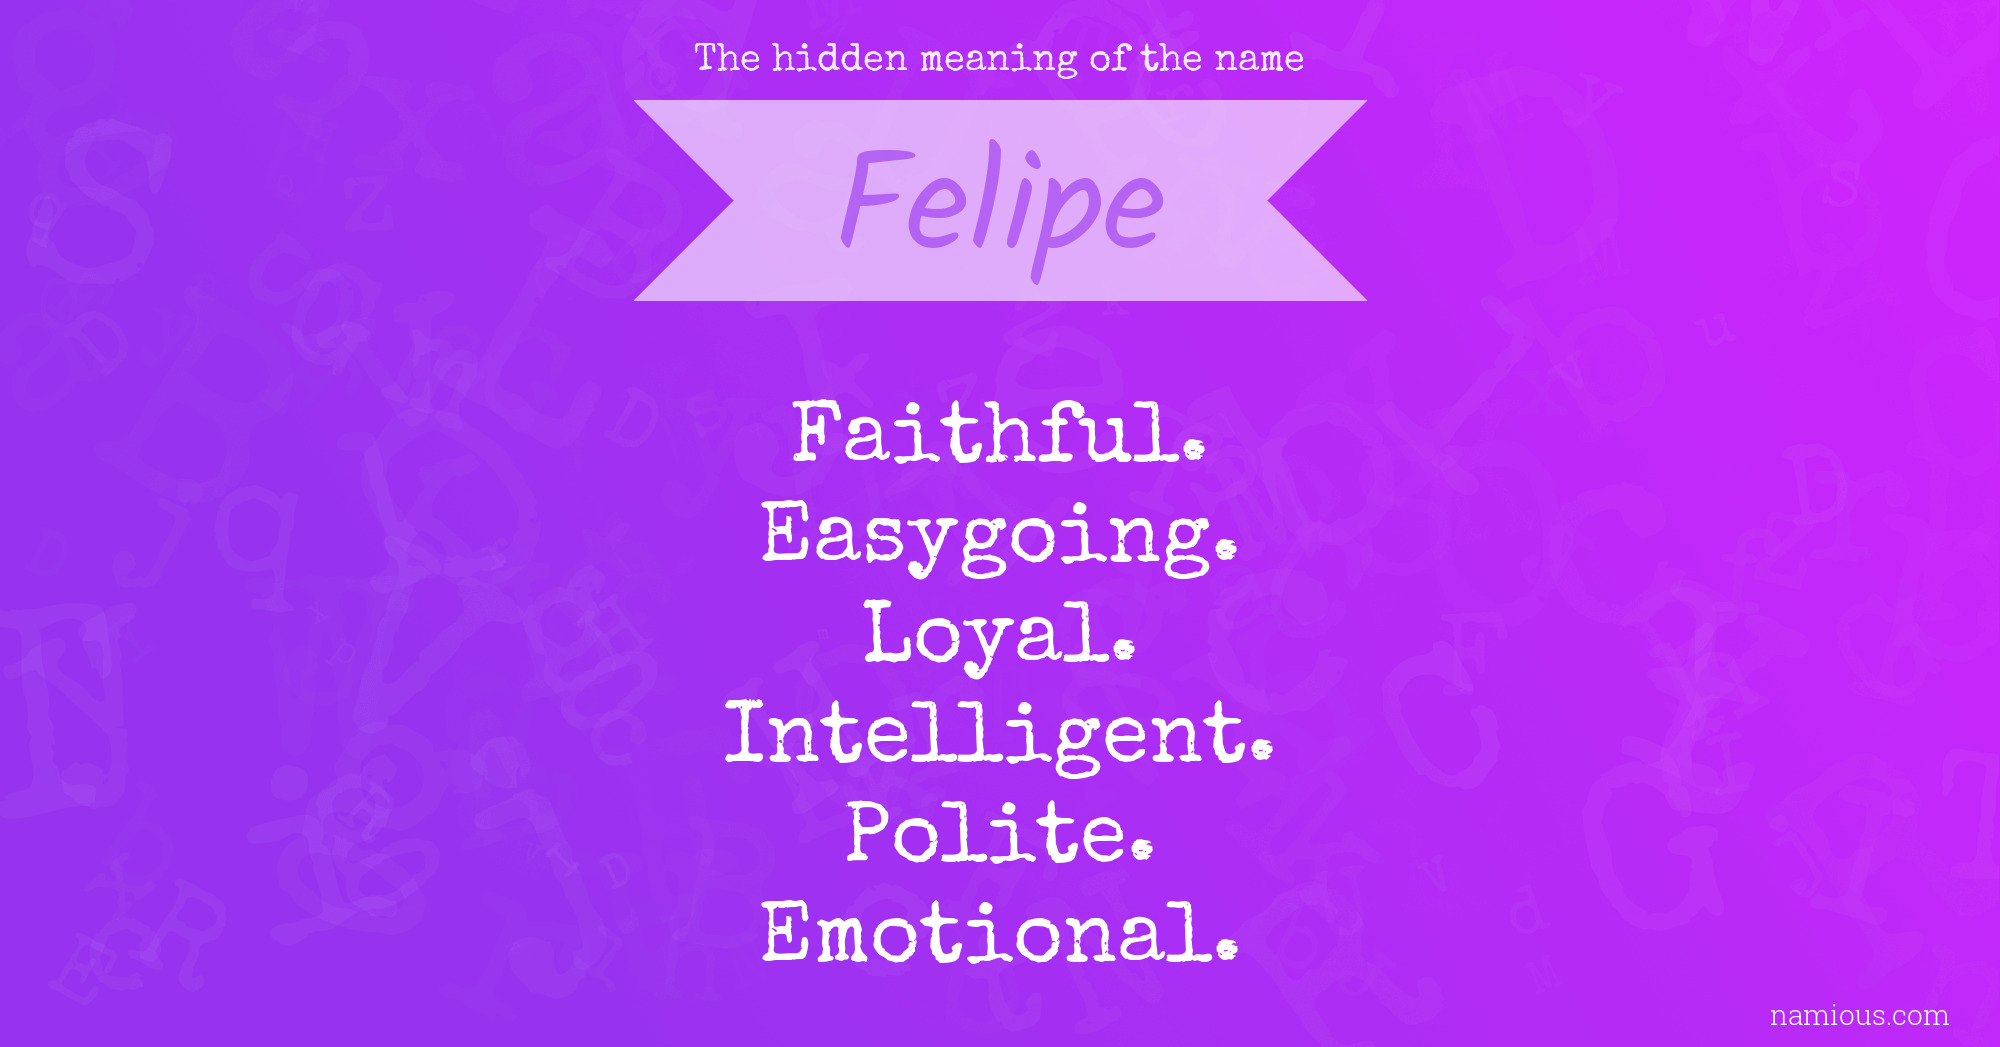 The hidden meaning of the name Felipe